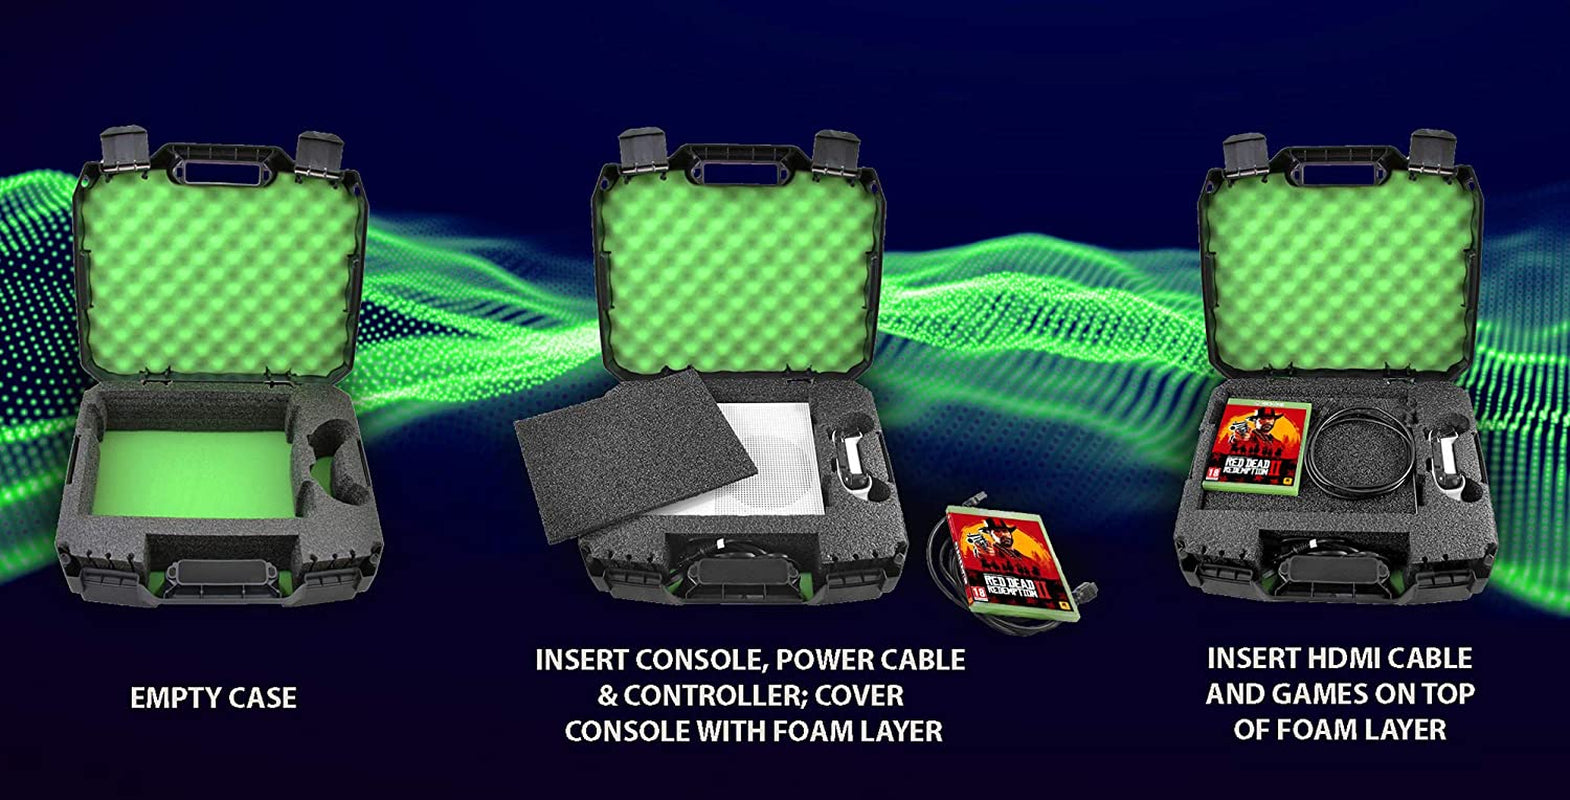 Travel Case Compatible with Xbox One S with Protective Foam Compartments for Console, Controller, Power Adapter, Games and More Accessories